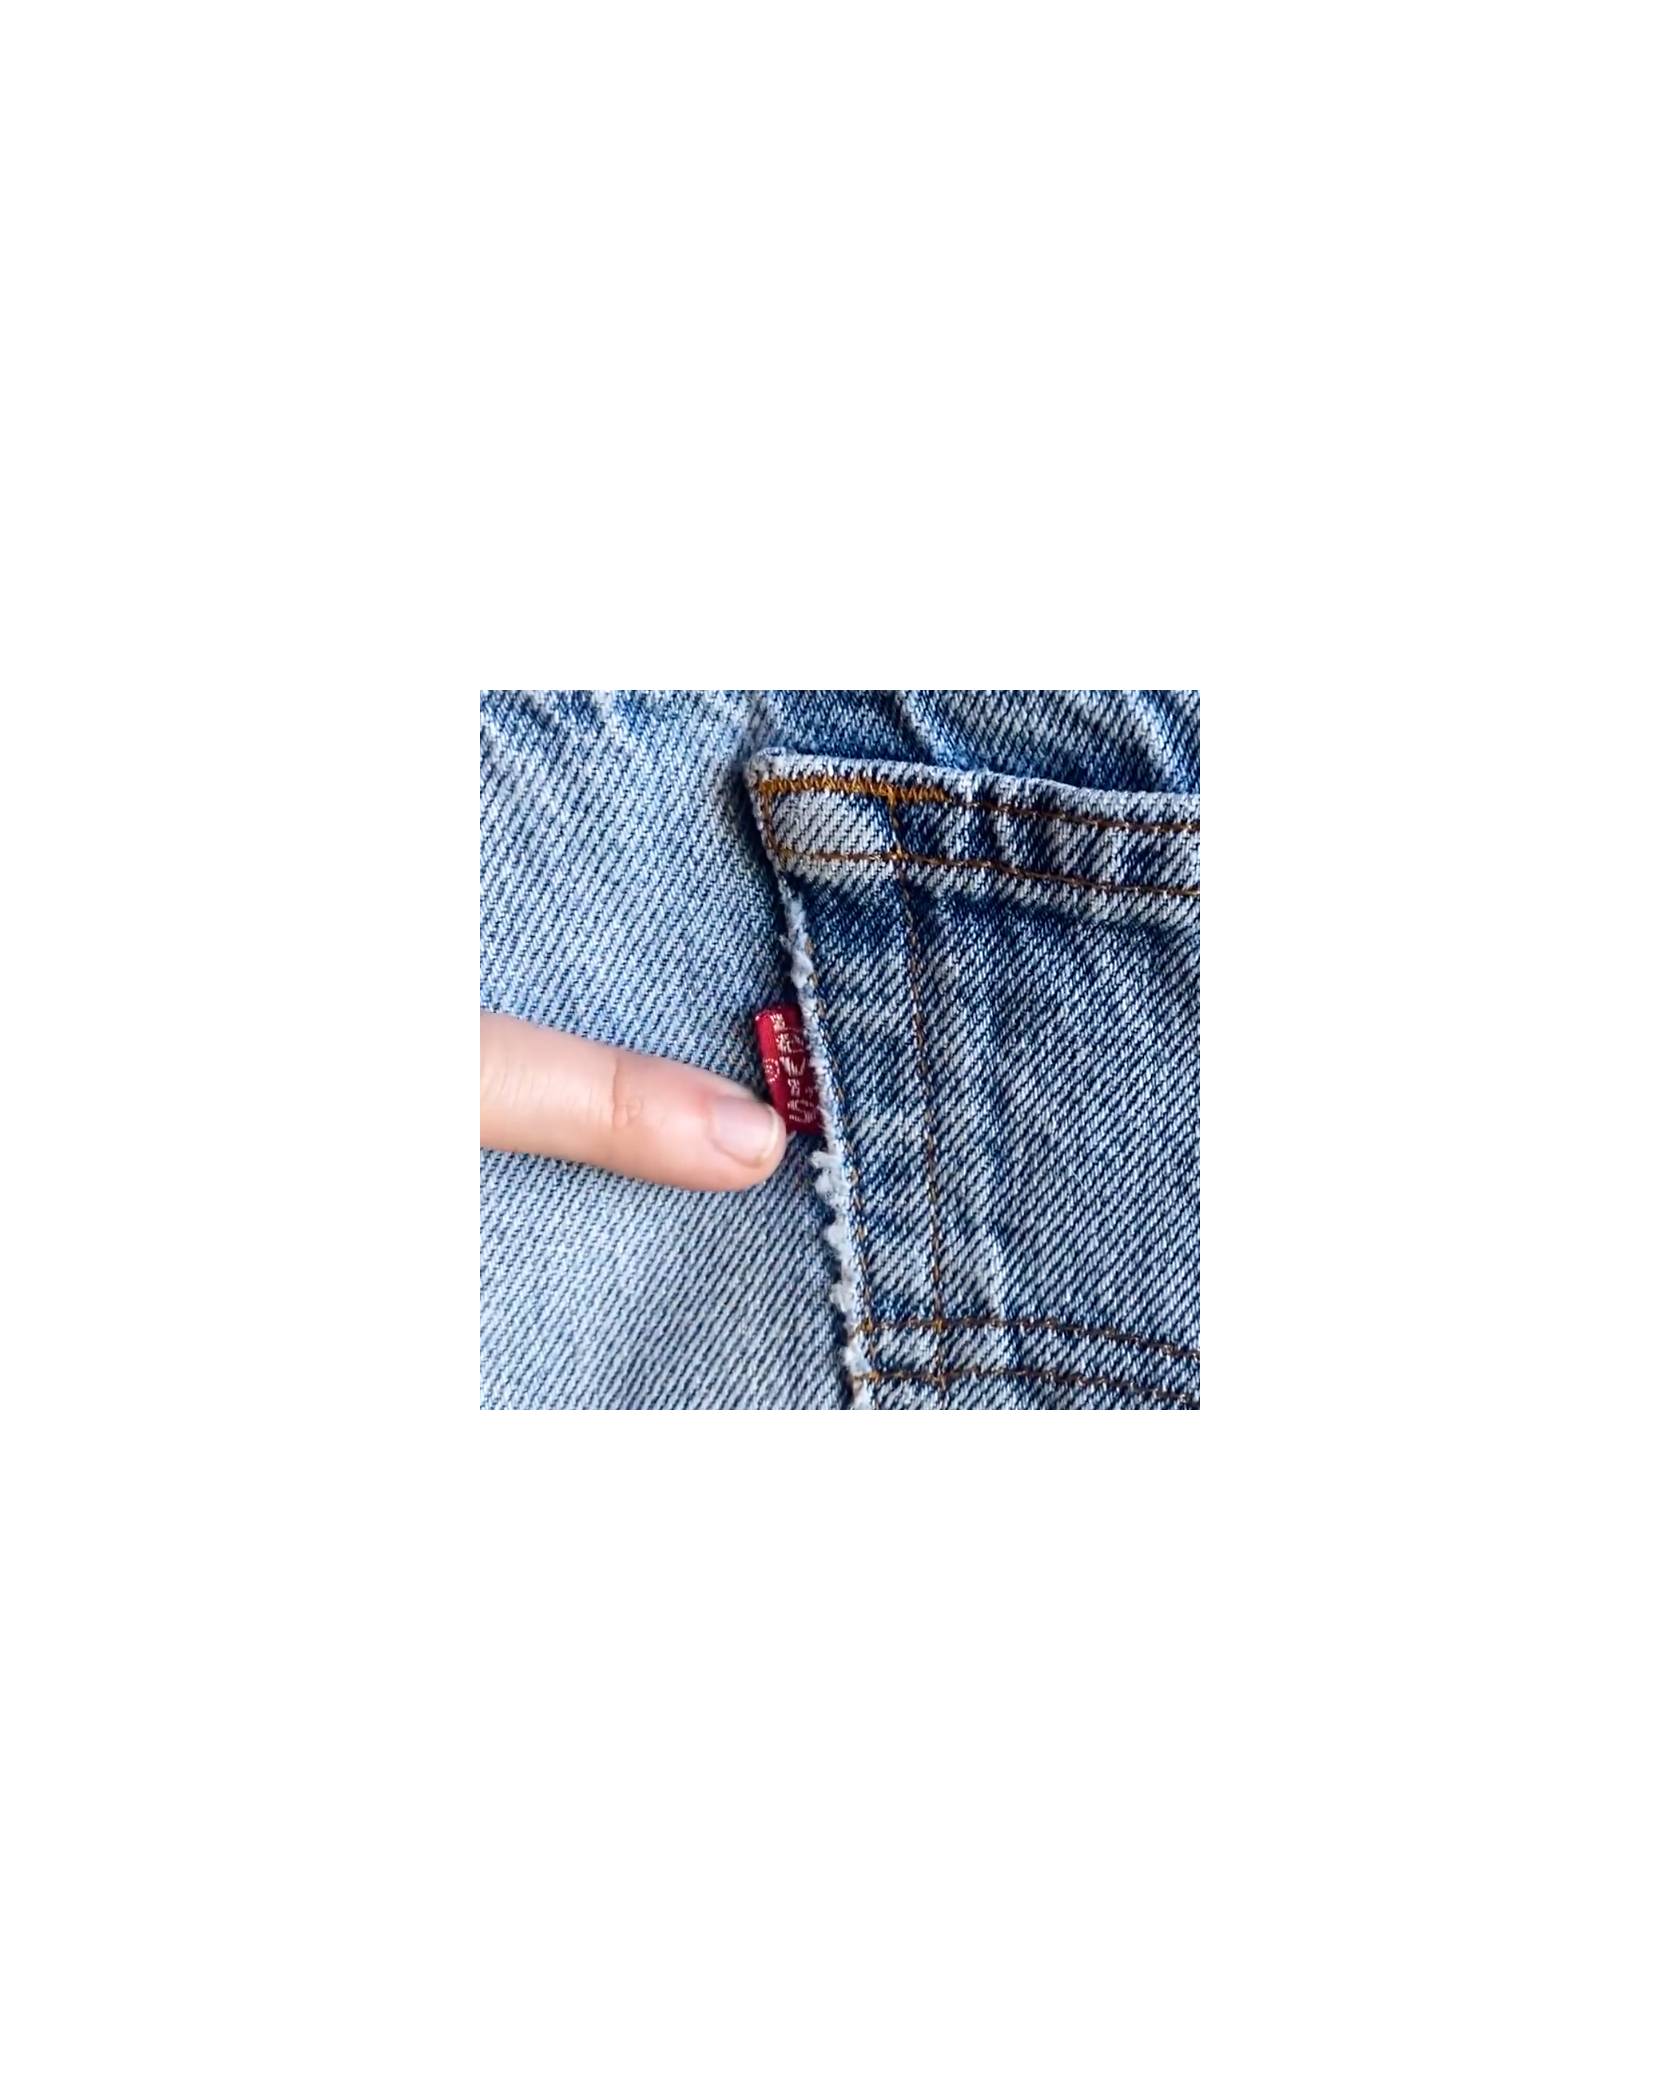 The red tab on the back of Levi's jeans